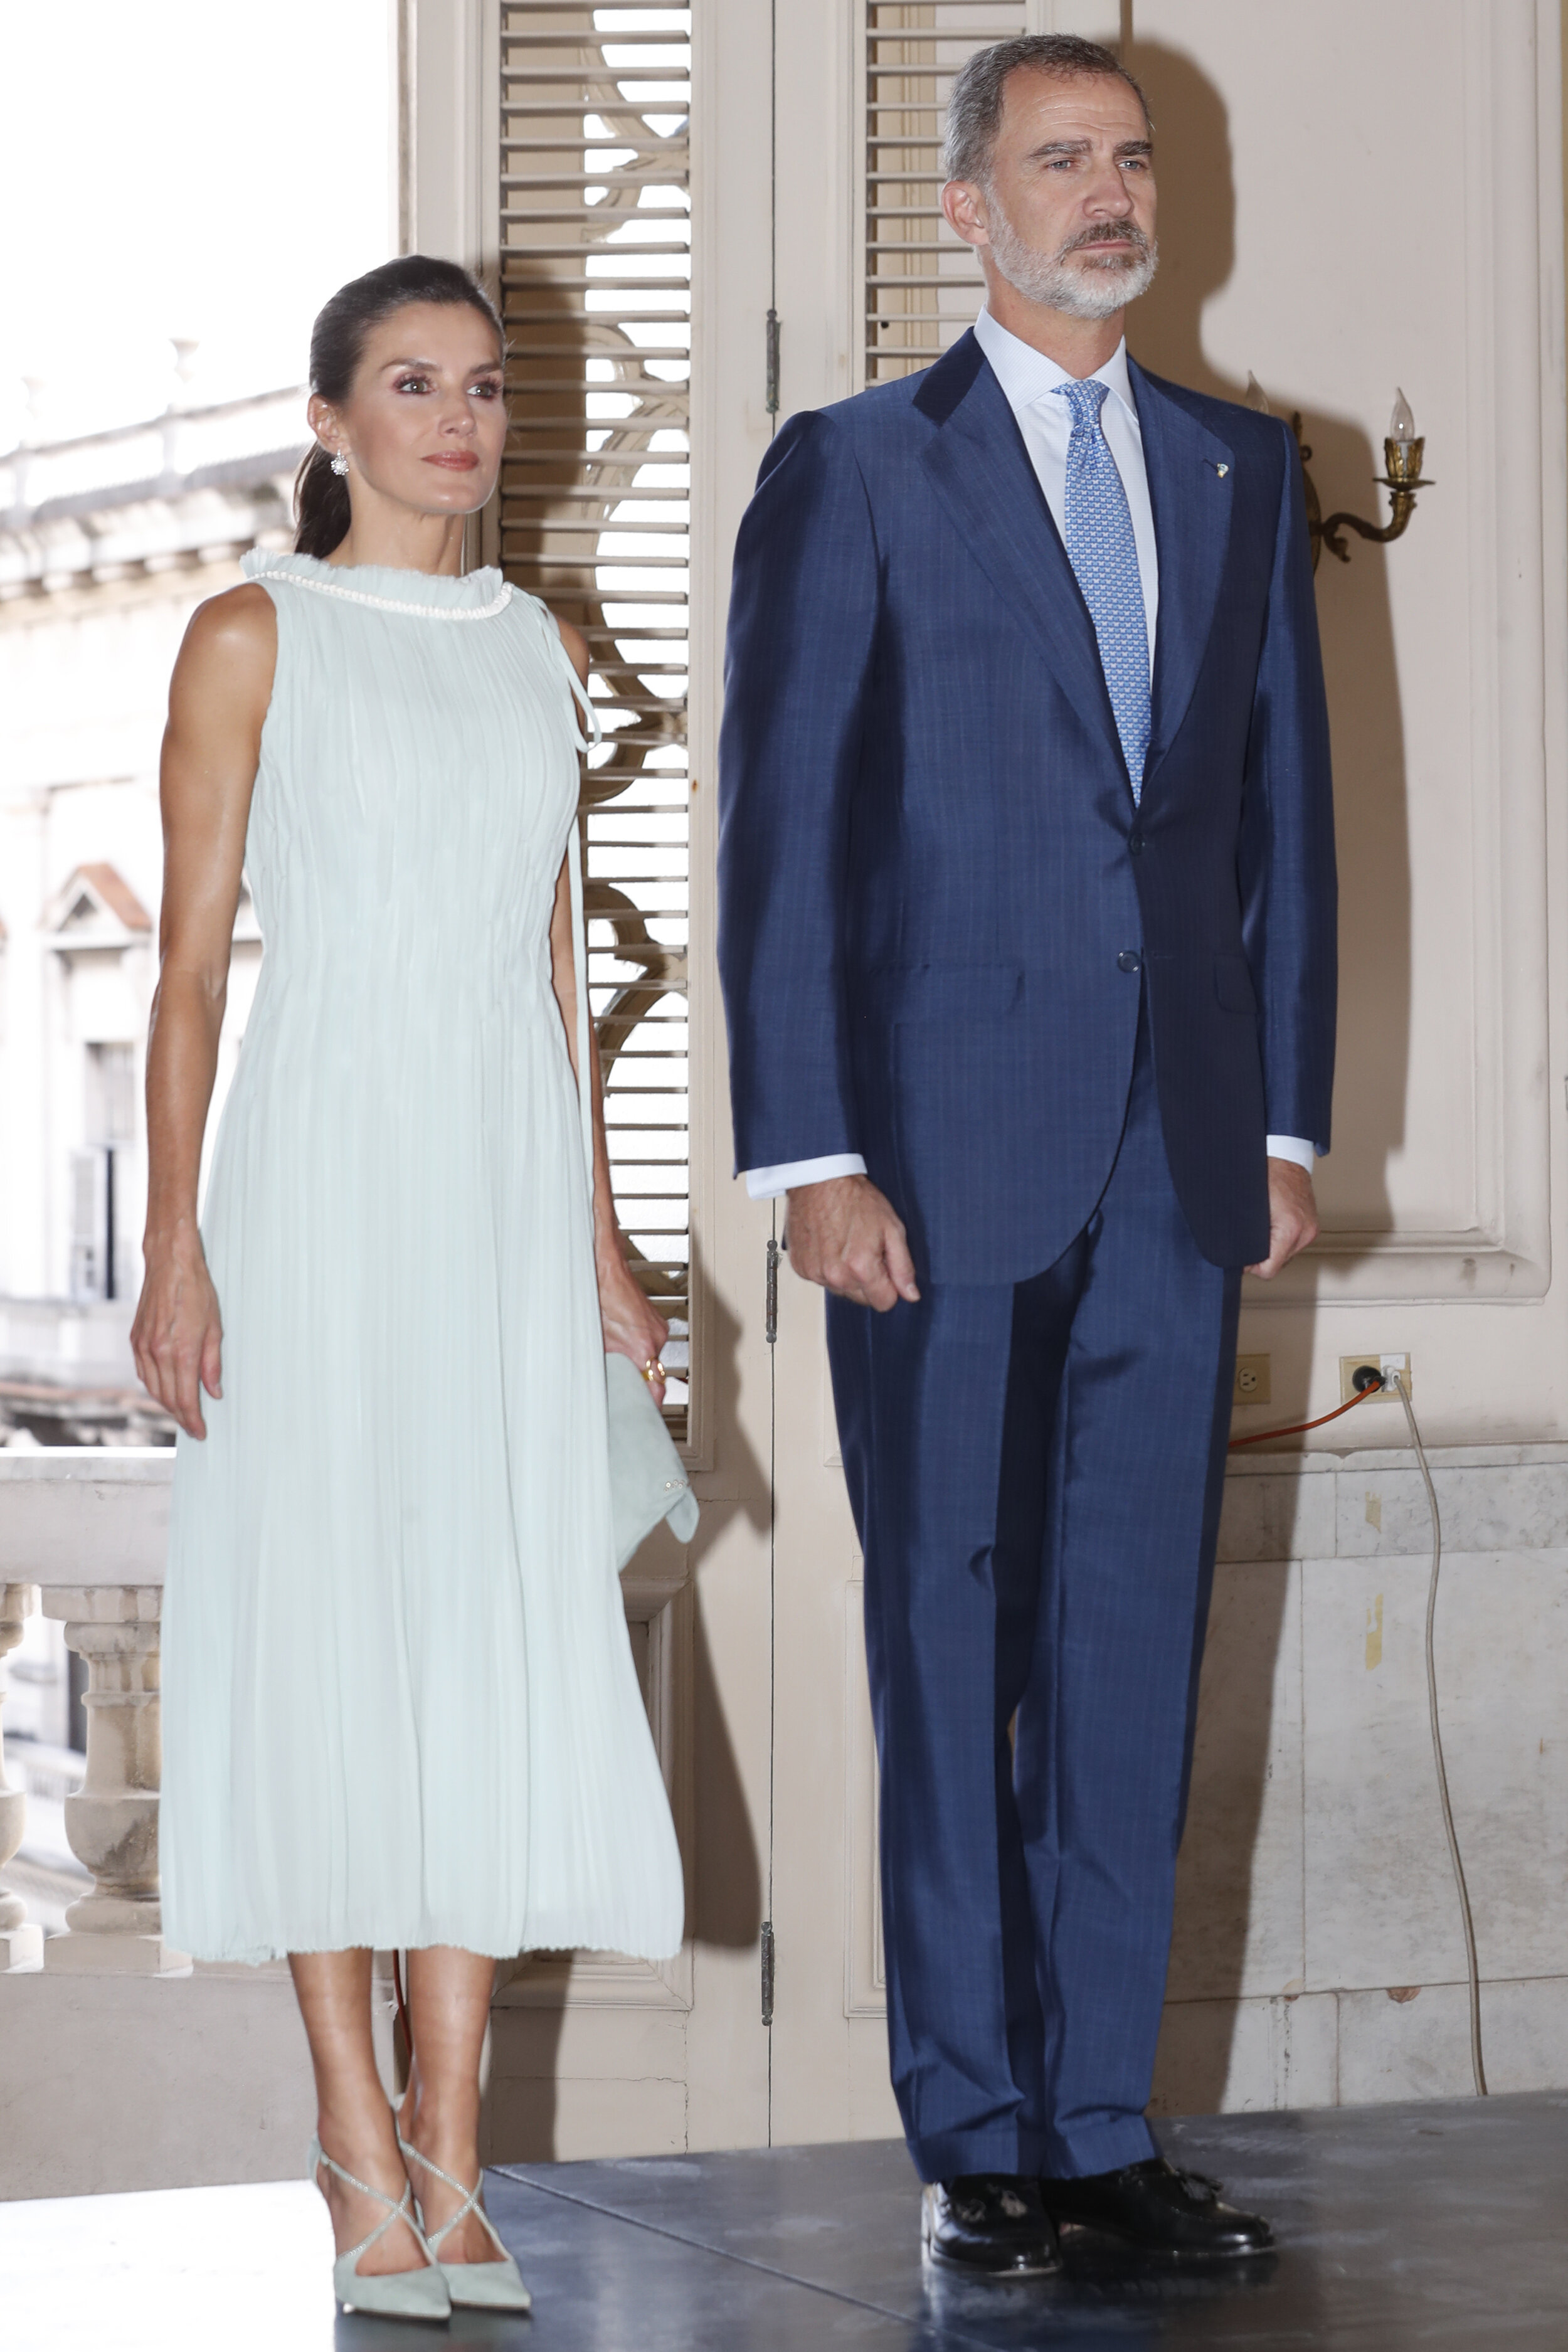 The King and Queen of Spain Attend Reception in Havana, Cuba — Royal ...